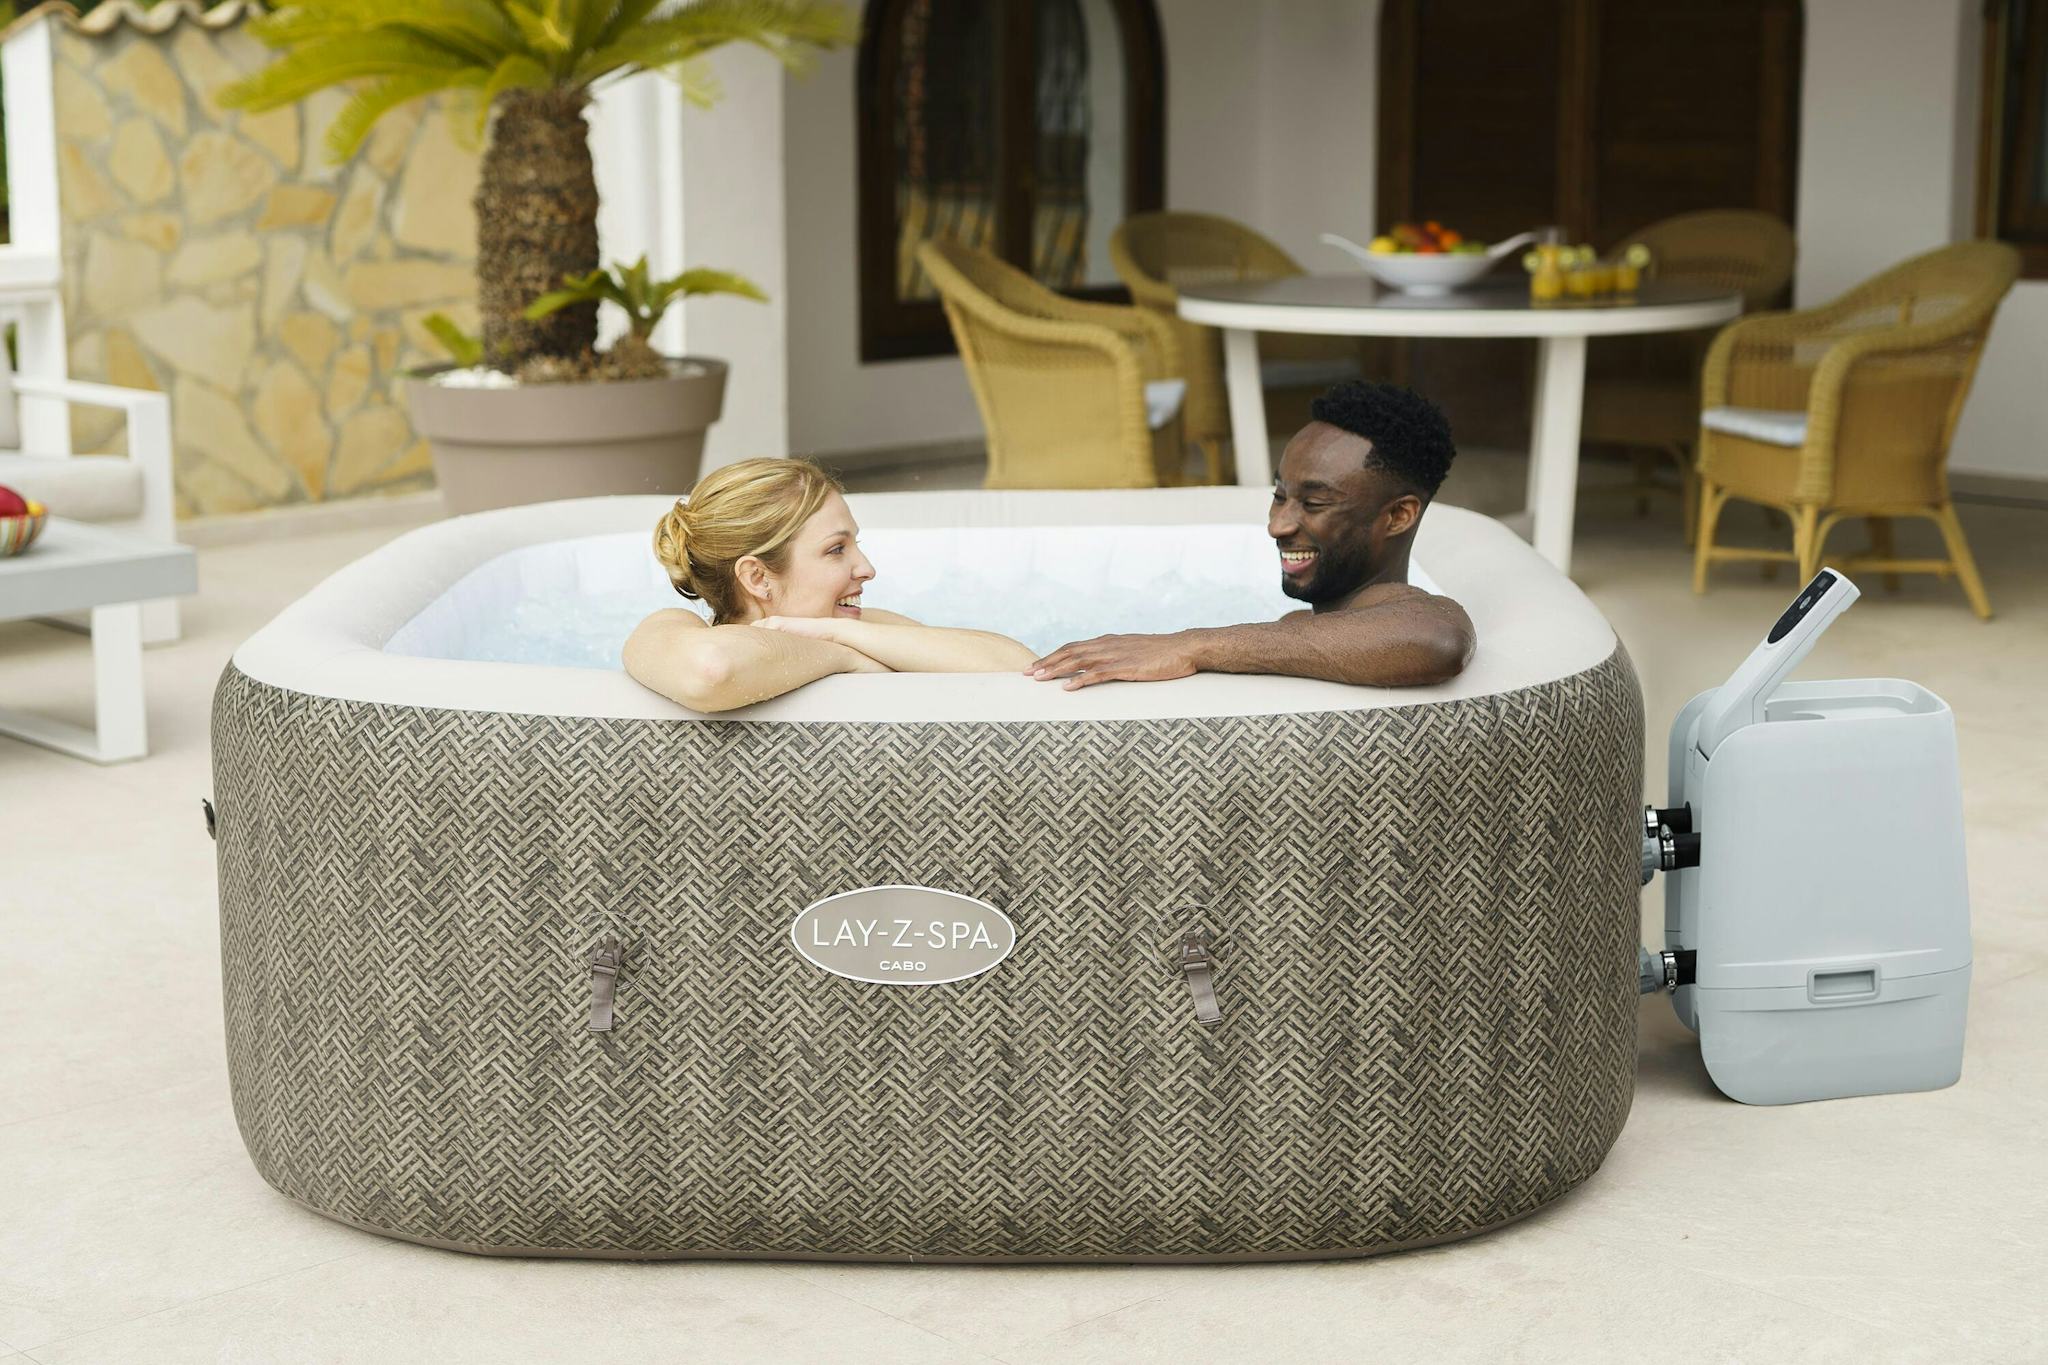 Spas Gonflables Spa gonflable carré Lay-Z-Spa Cabo Hydrojet™ 4-6 places Wifi Bestway 6